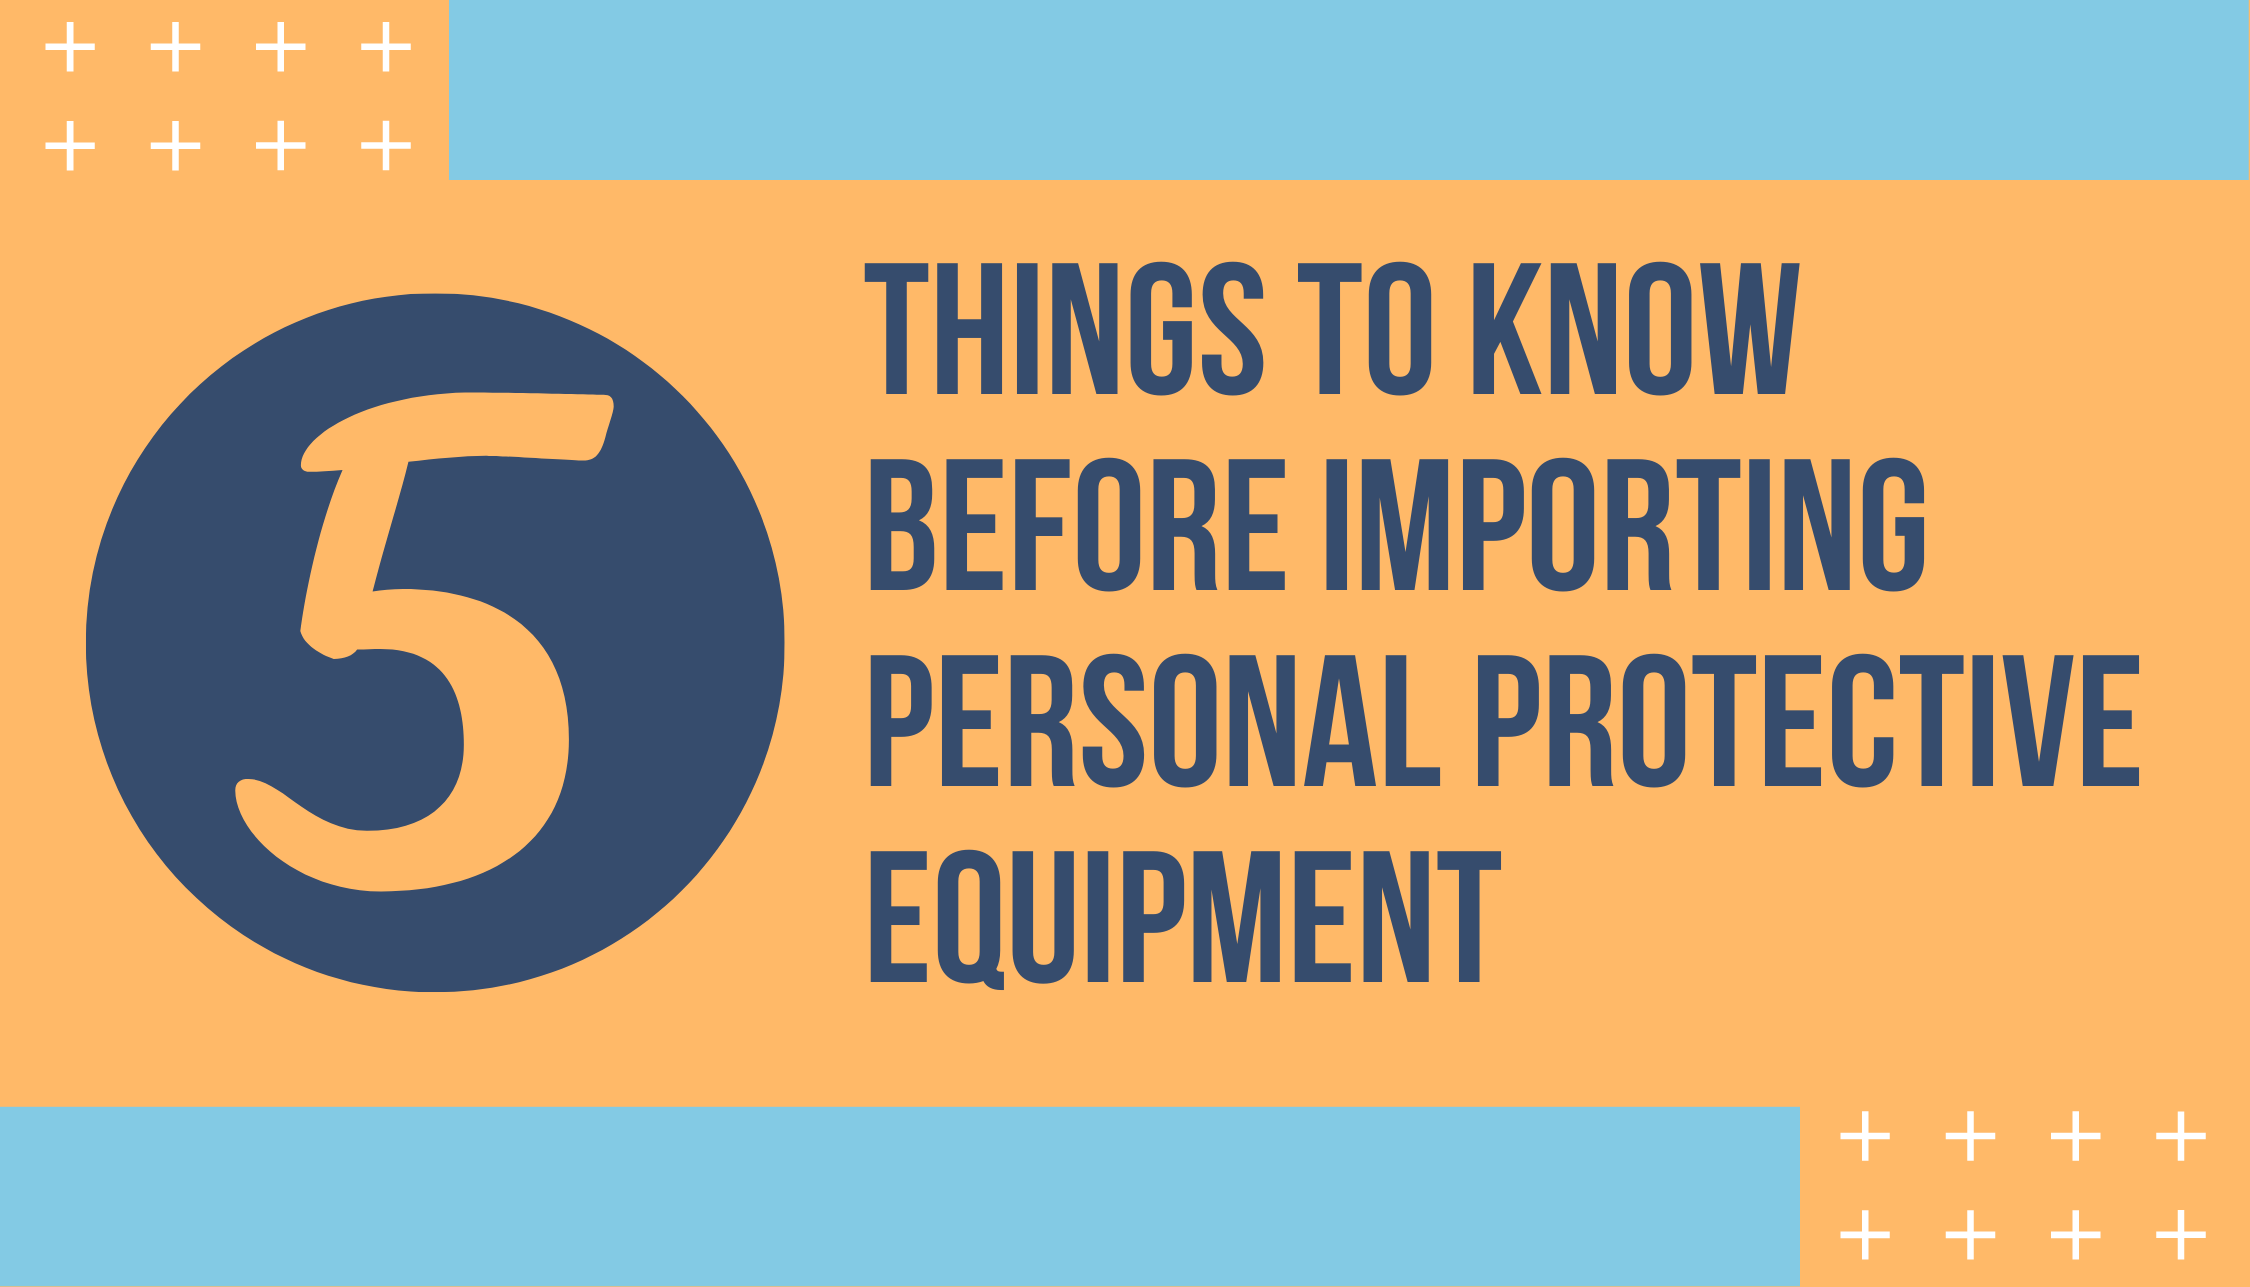 5 Things to Know Before Importing Personal Protective Equipment